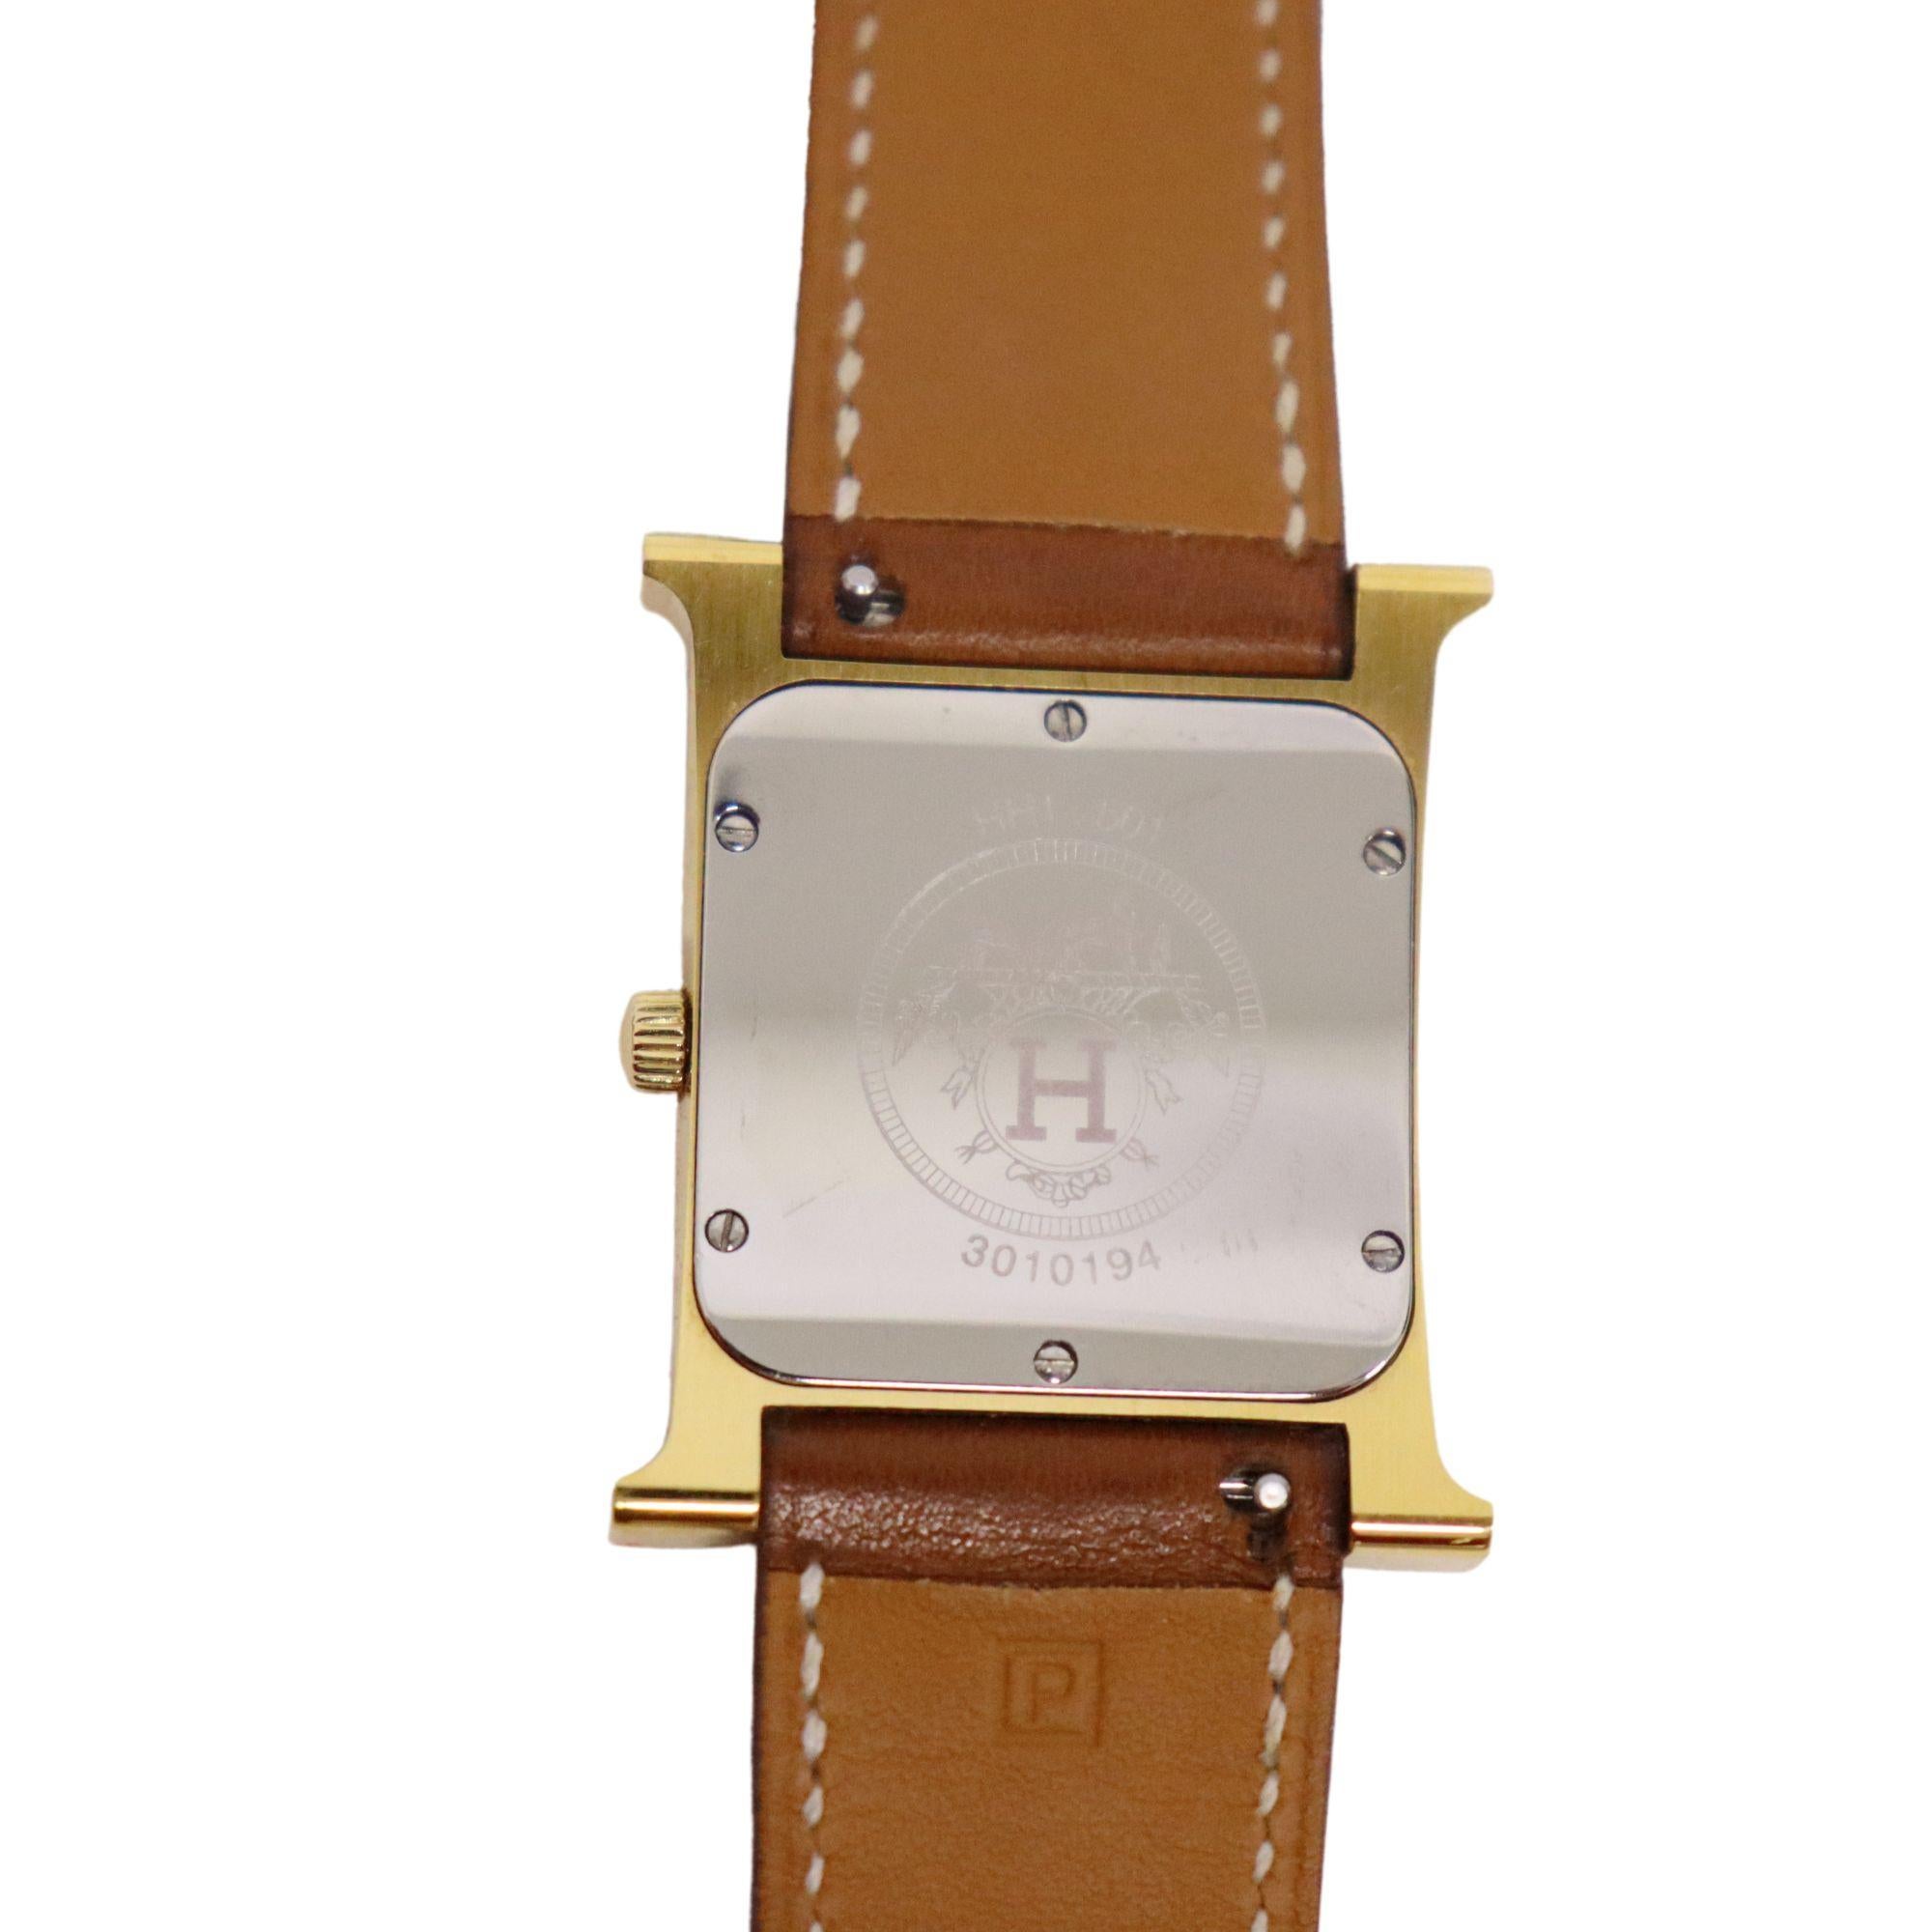 Hermes Heure H watch, yellow-gold plated steel watch with sunburst stamped motif, white dial, 26 x 26 mm, long interchangeable strap in gold Epsom calfskin

Additional information:
Yellow-gold plated steel case
Anti-glare sapphire crystal
White